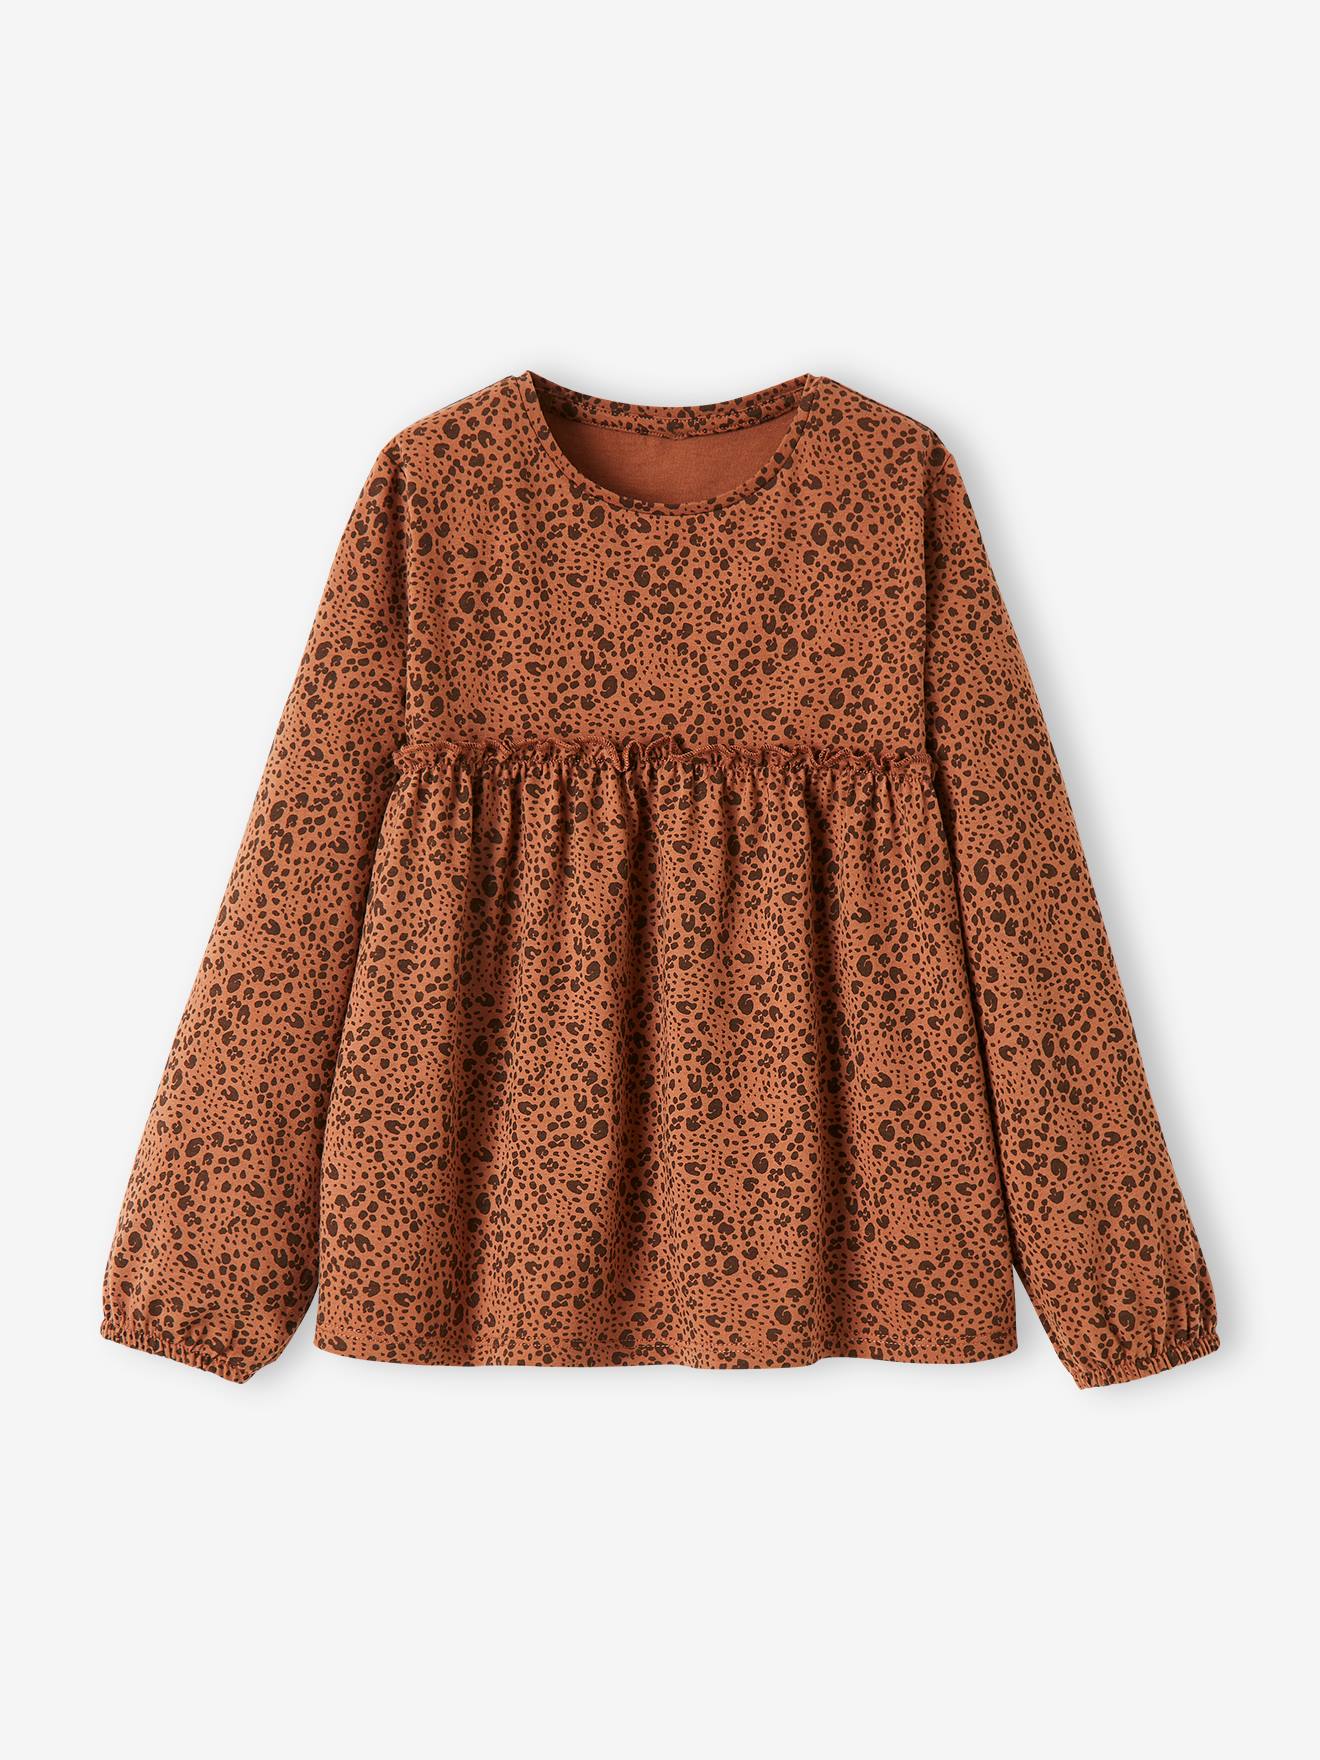 Printed Top for Girls brown dark all over printed